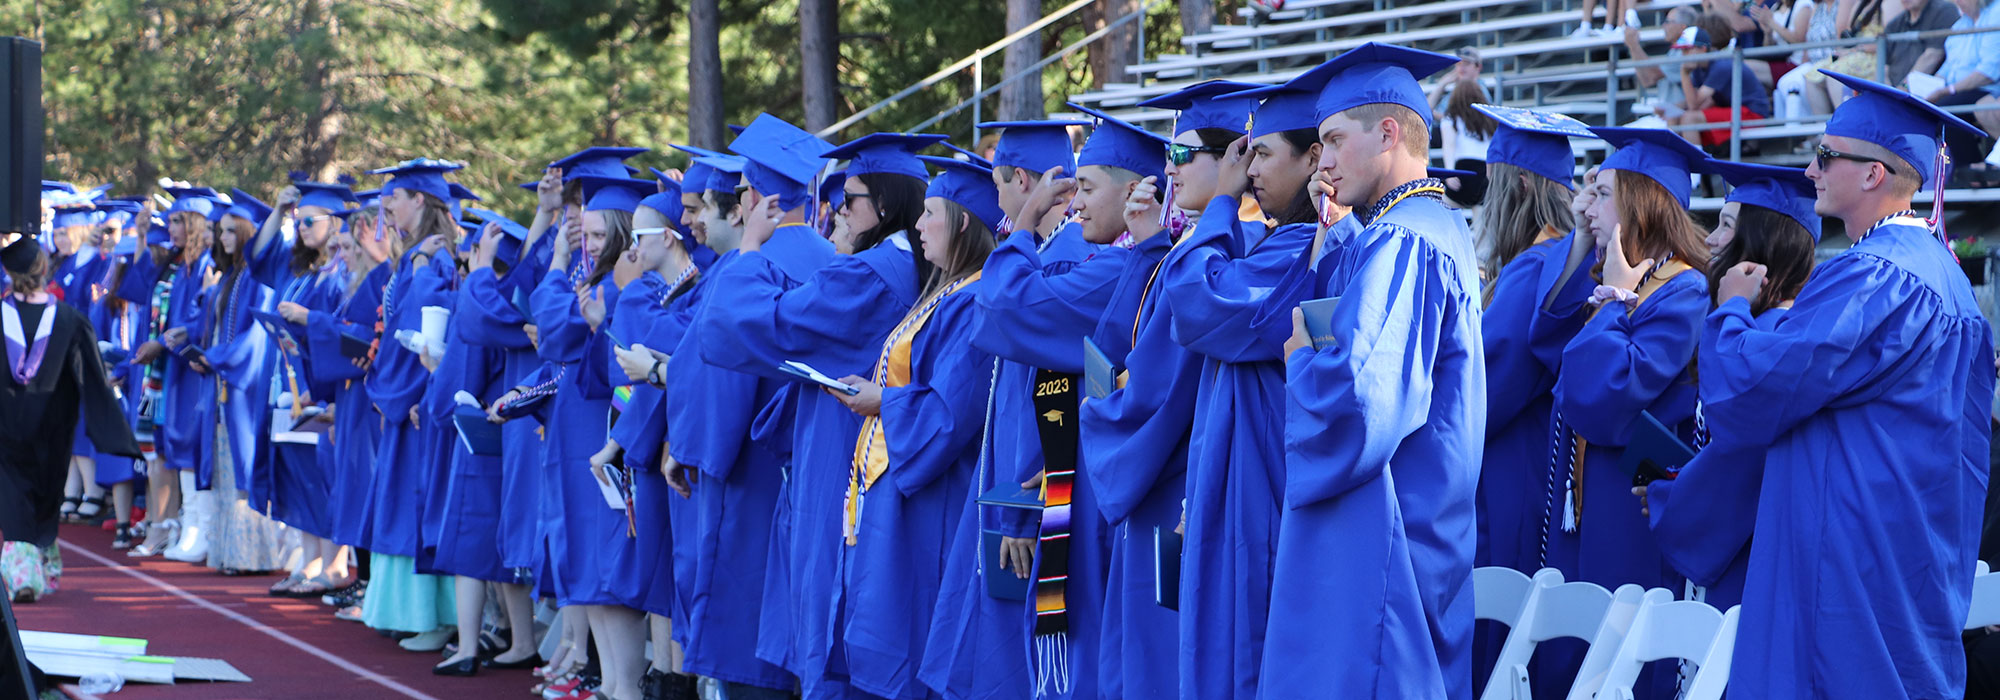 Students Participating in Graduation